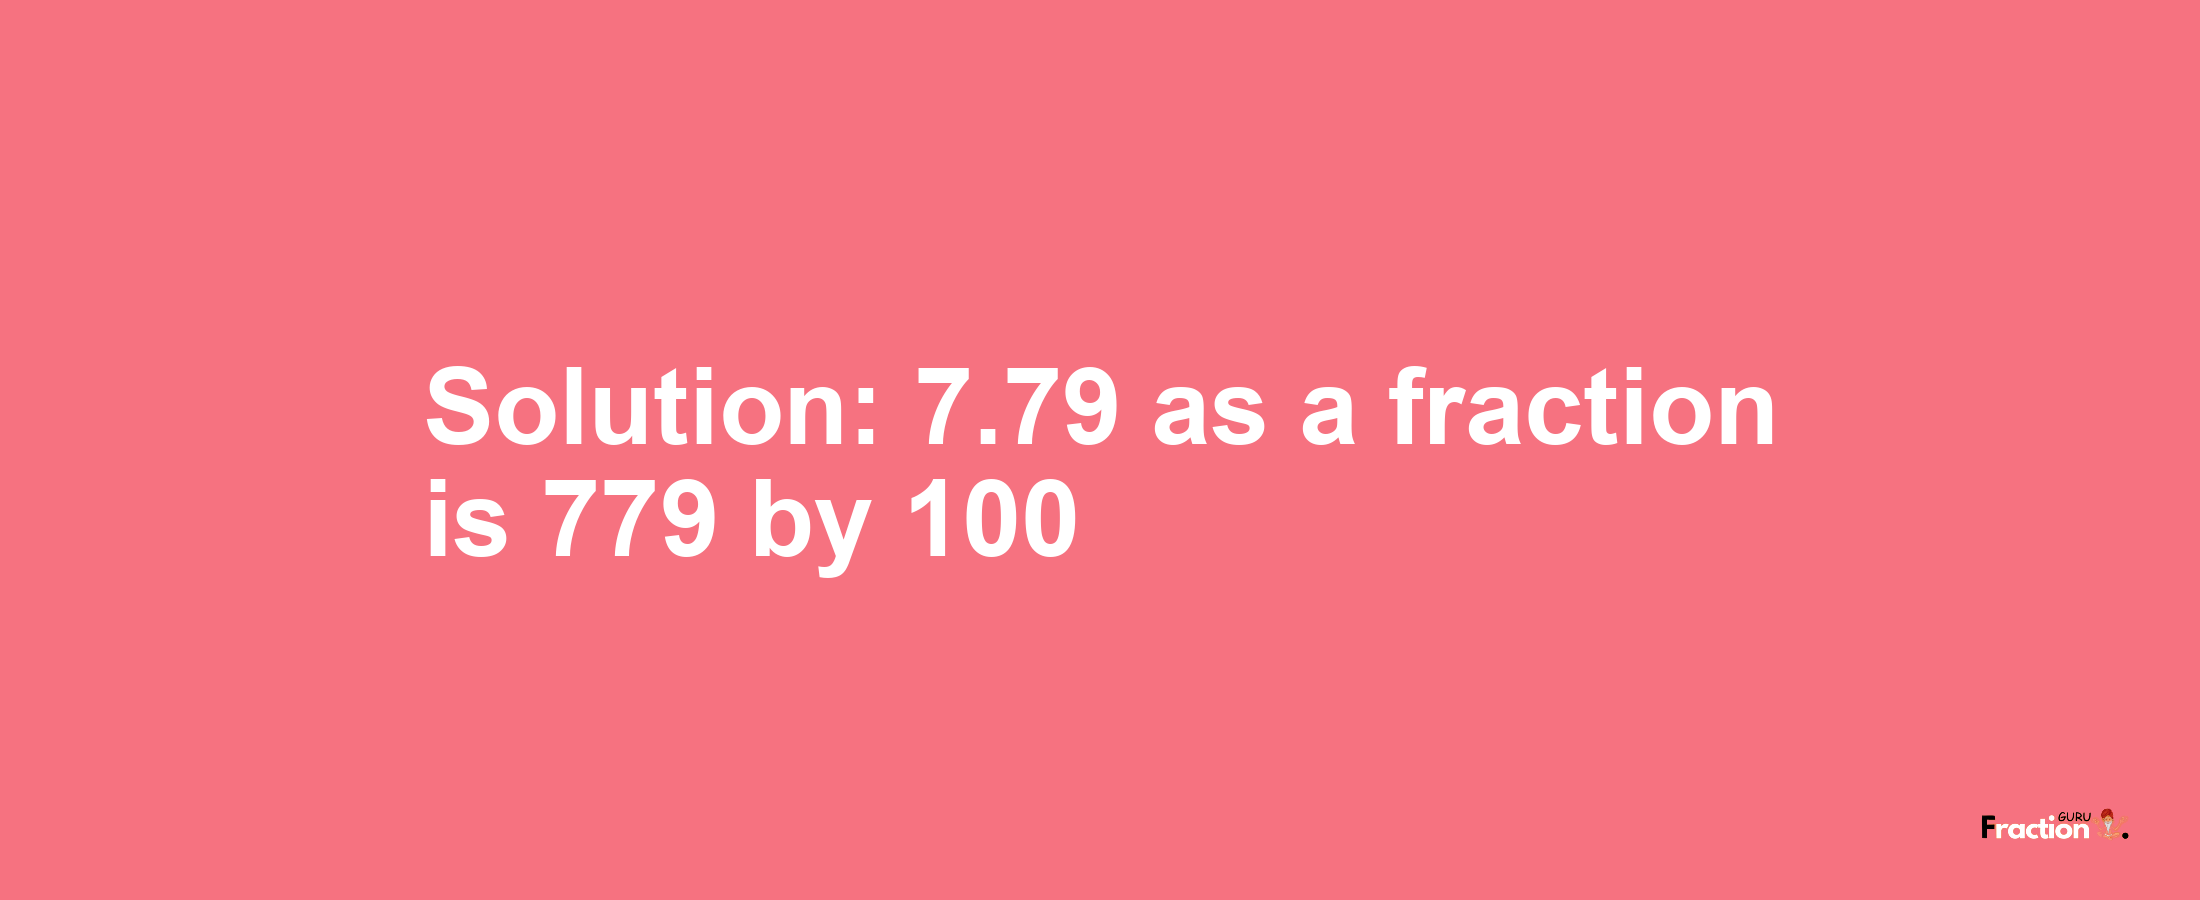 Solution:7.79 as a fraction is 779/100